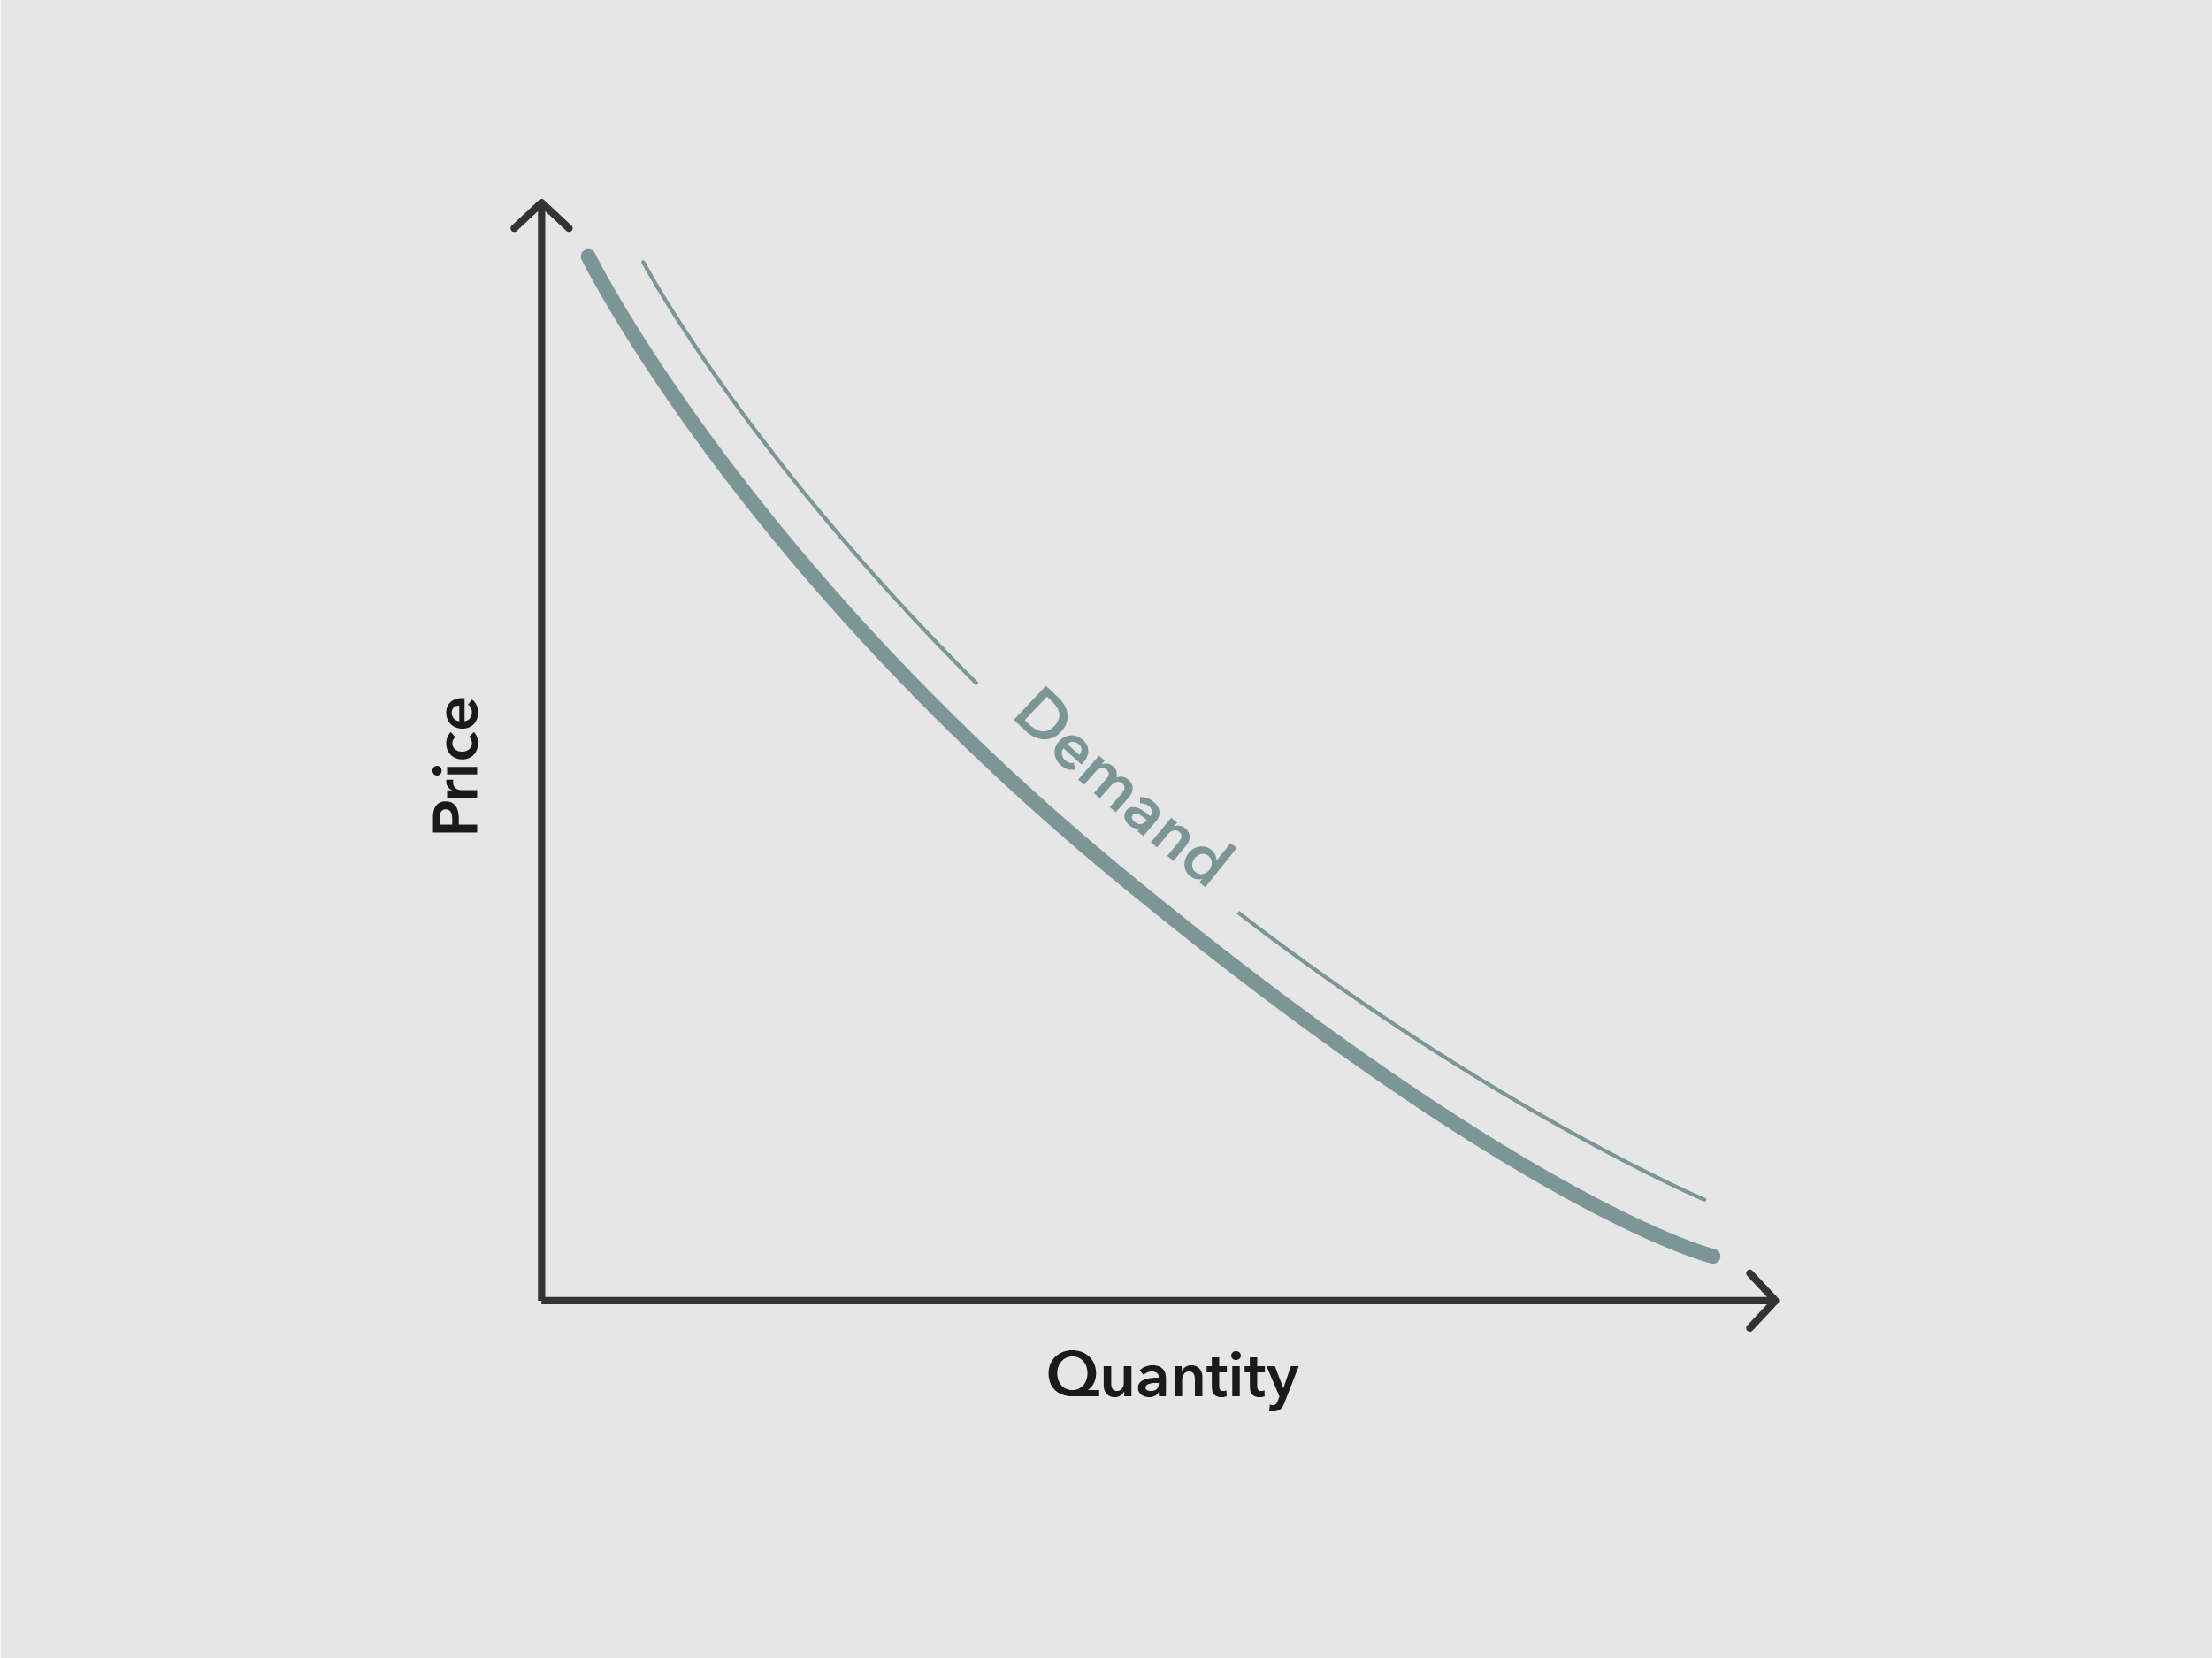 Graph of the relationship between price and quantity as it relates to demand.